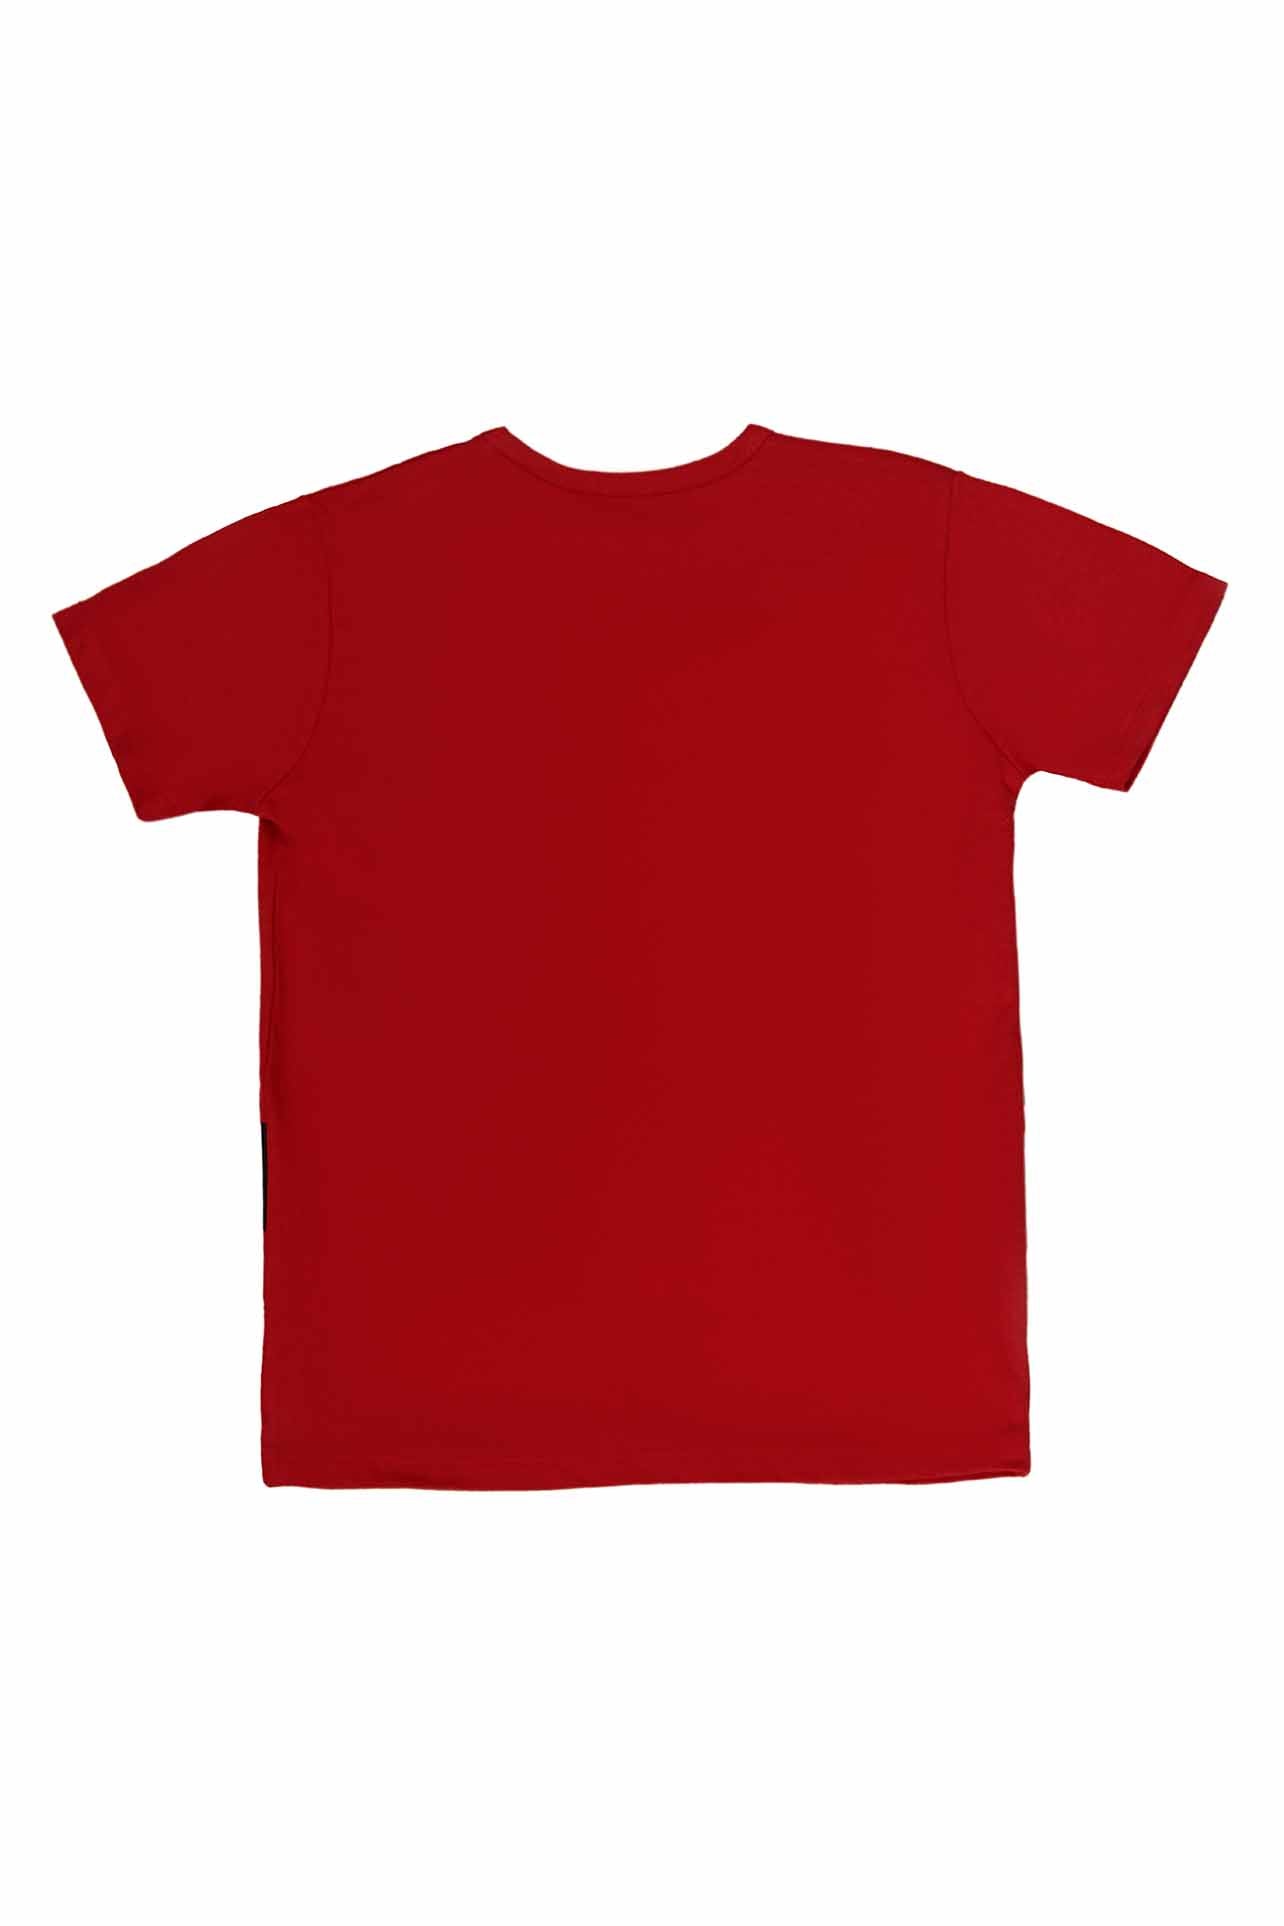 ROUND NECK T-SHIRT RED KDS-BC-12560